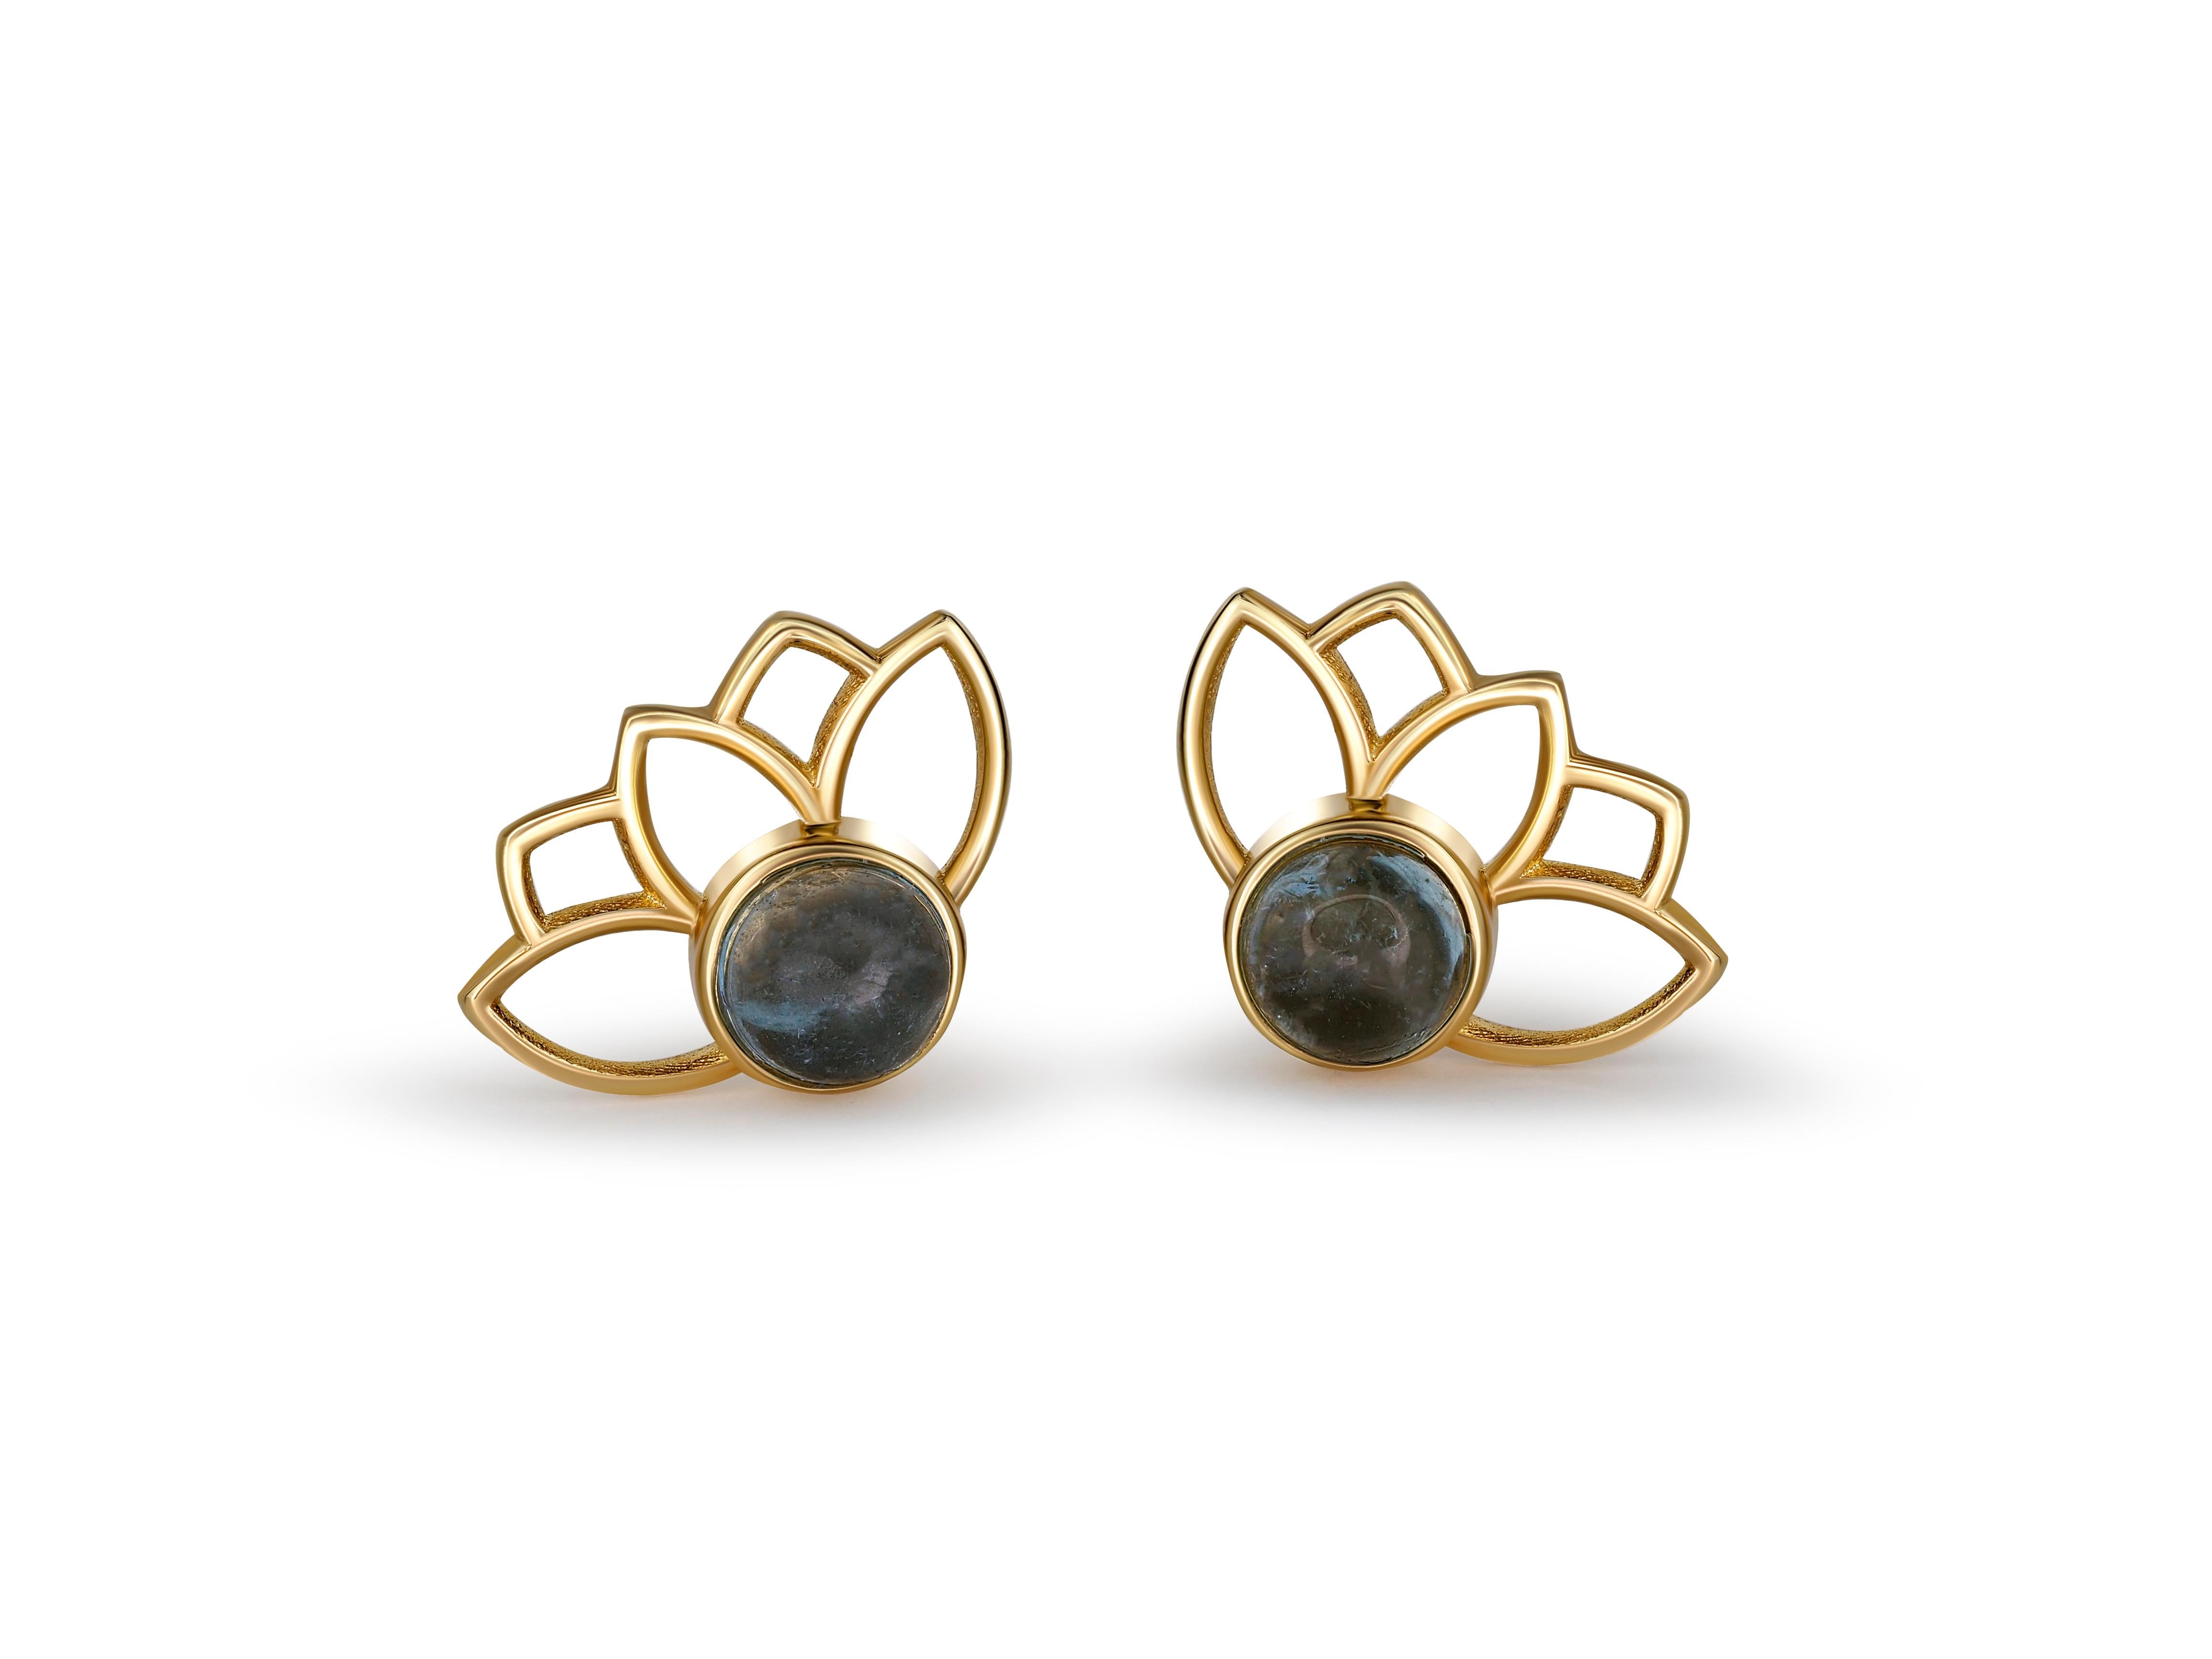 Cabochon Lotus flower earrings studs in 14k gold.  For Sale